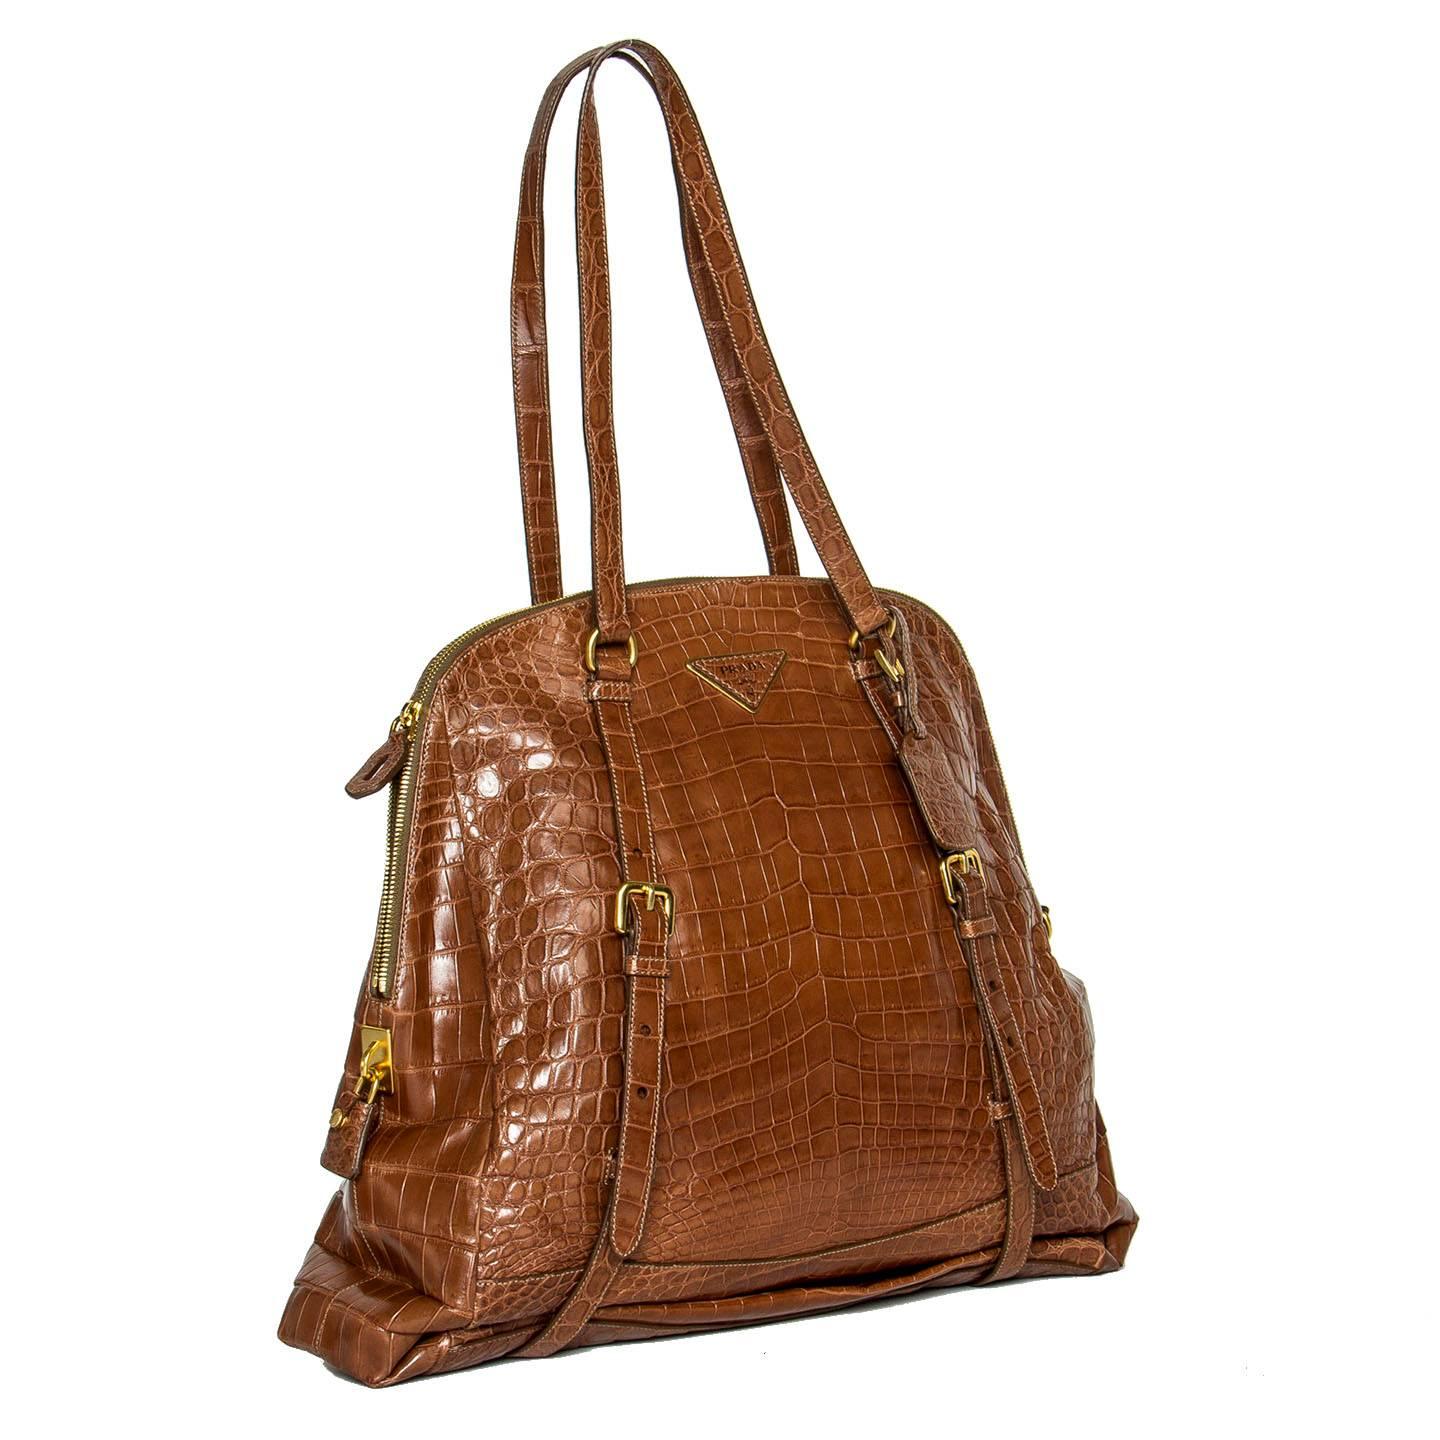 Light brown crocodile large bag with long shoulder straps that go around the bag, decorate and make the length of the body extendable. All the buckles and the chunky zipper are brushed gold color, as well as the triangular metal and leather Prada